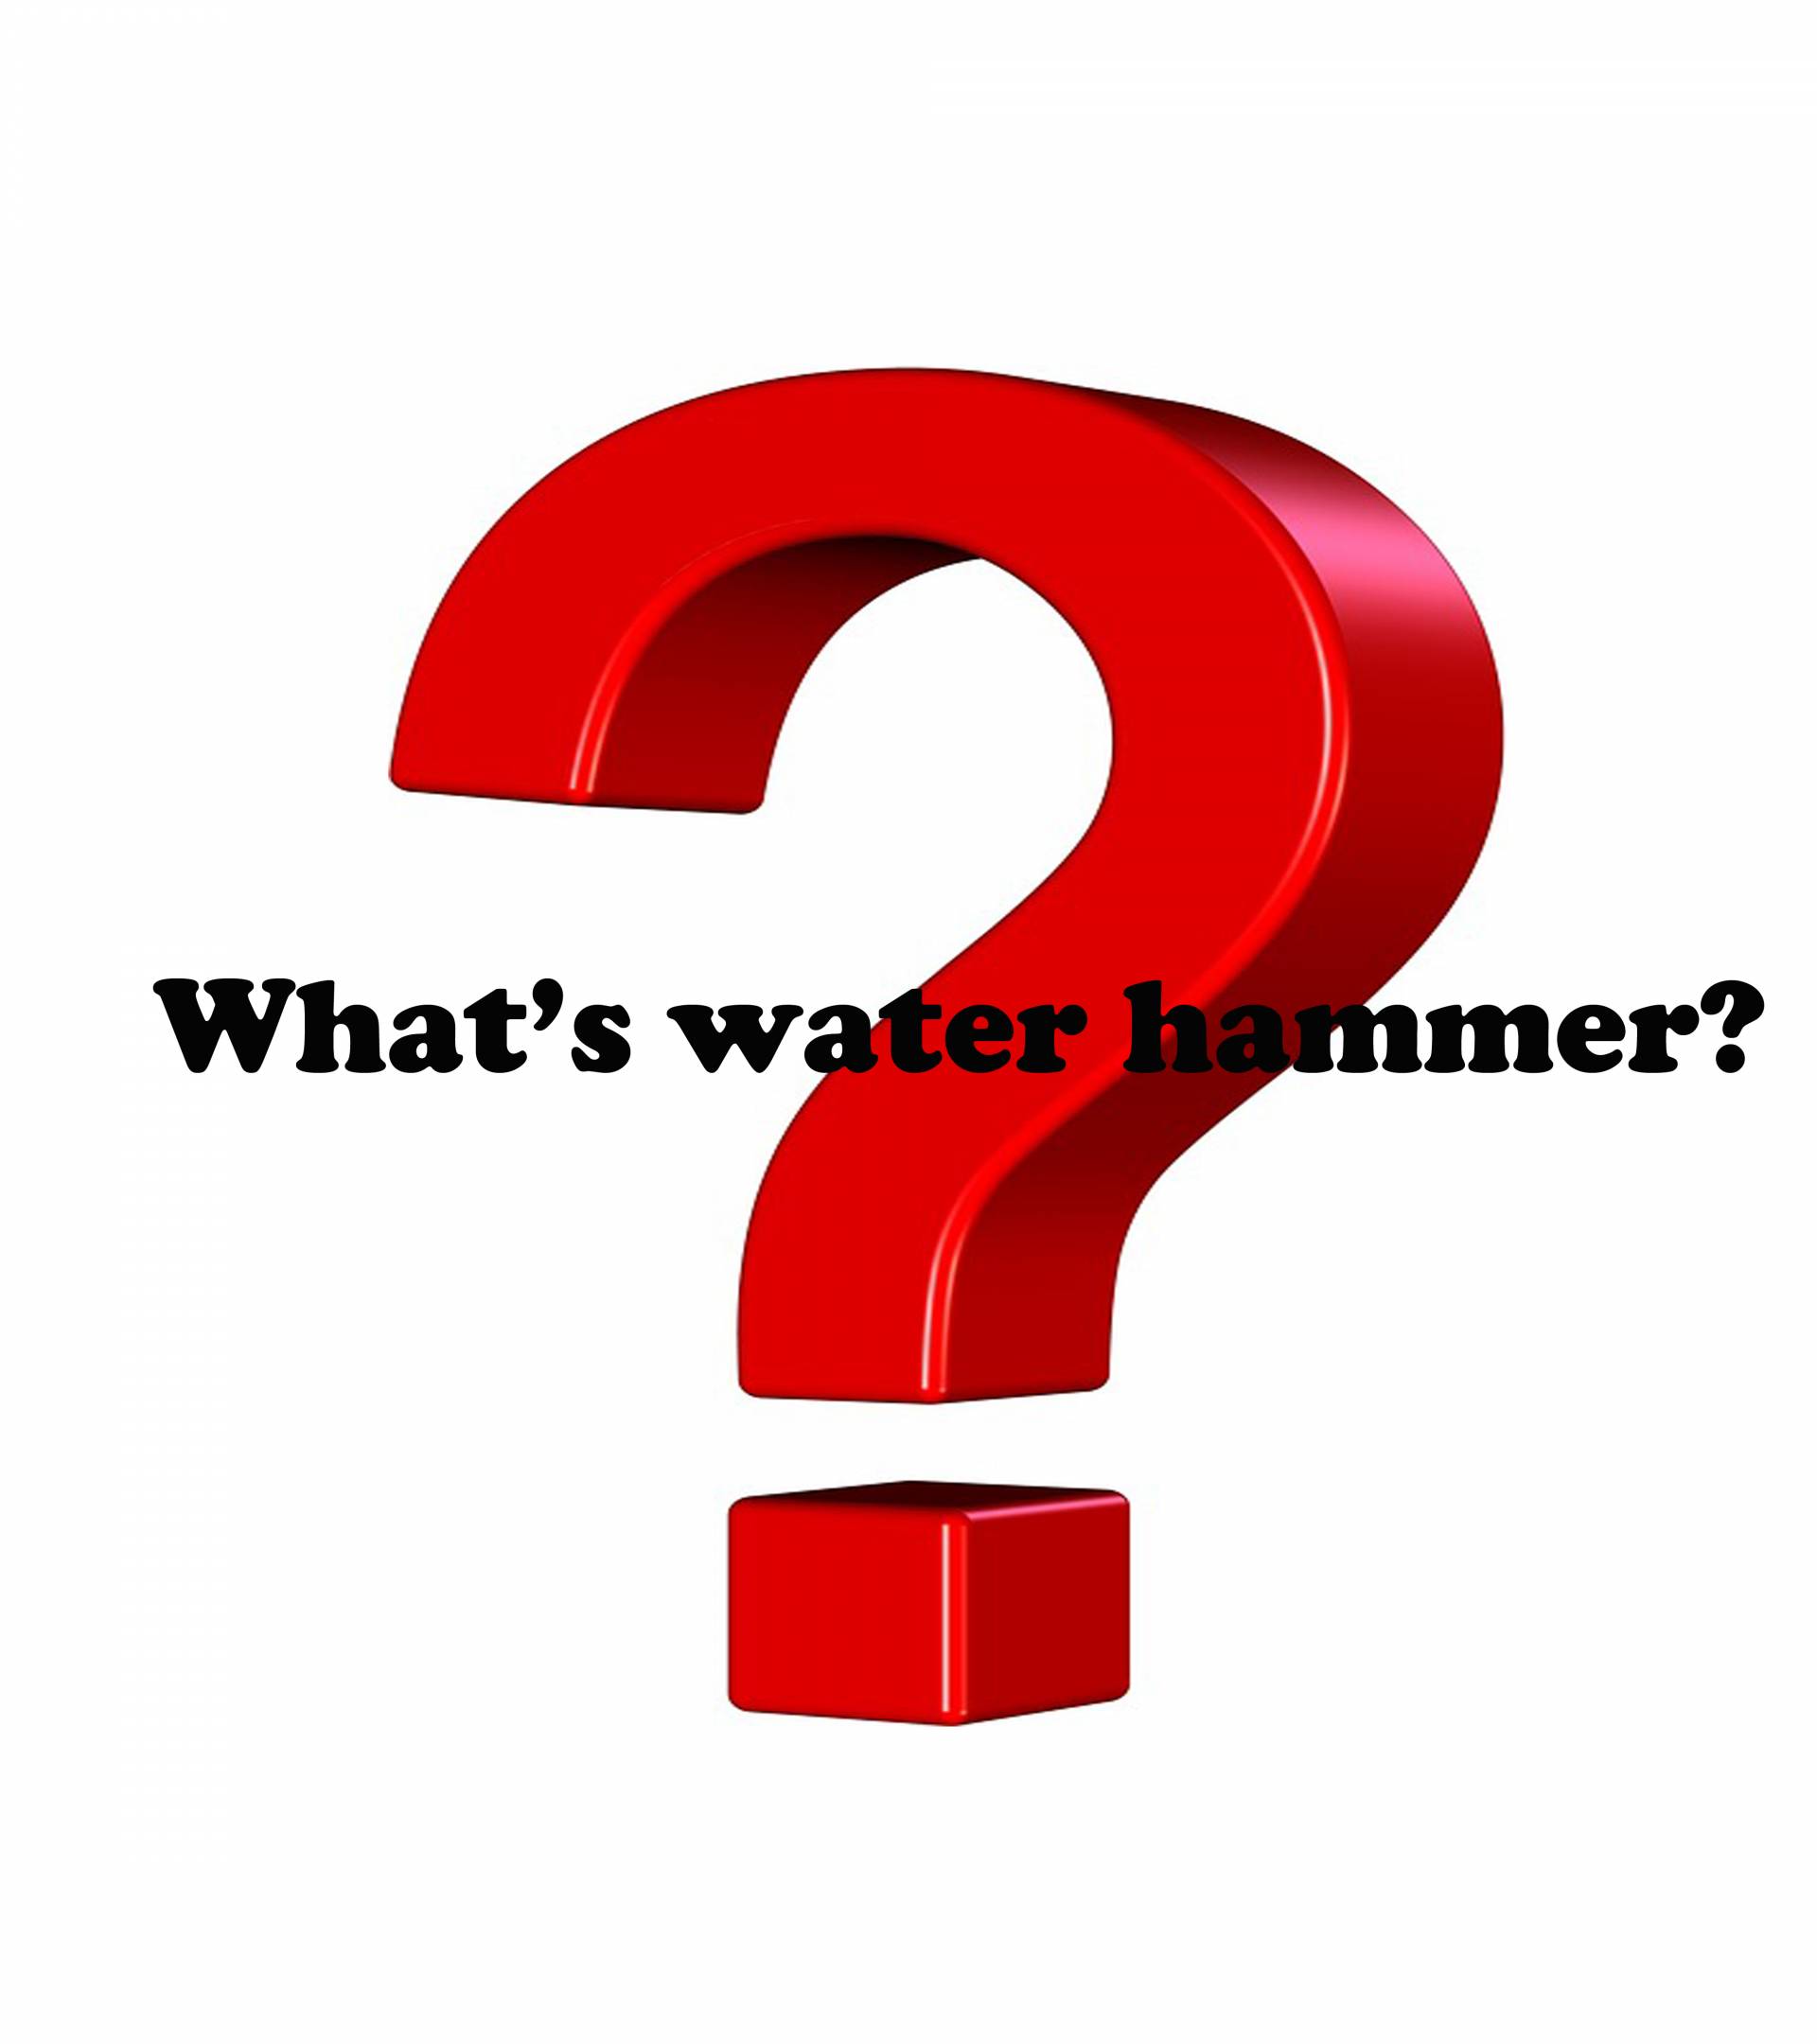 What’s water hammer?